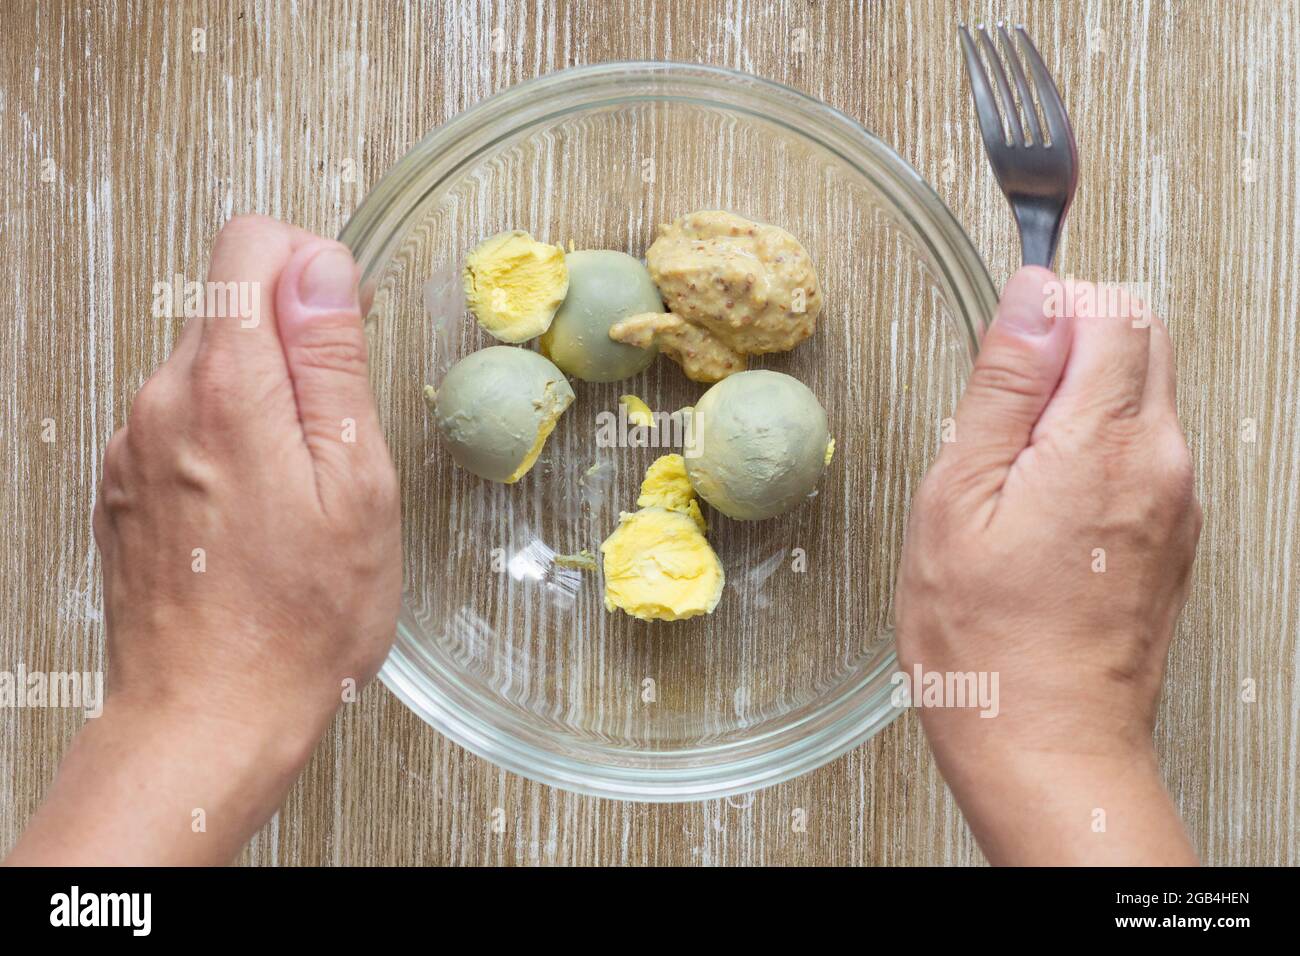 Top view of woman hands holding fork to crush boiled yolks and mustard in glass bowl to make flavoring for okroshka Stock Photo